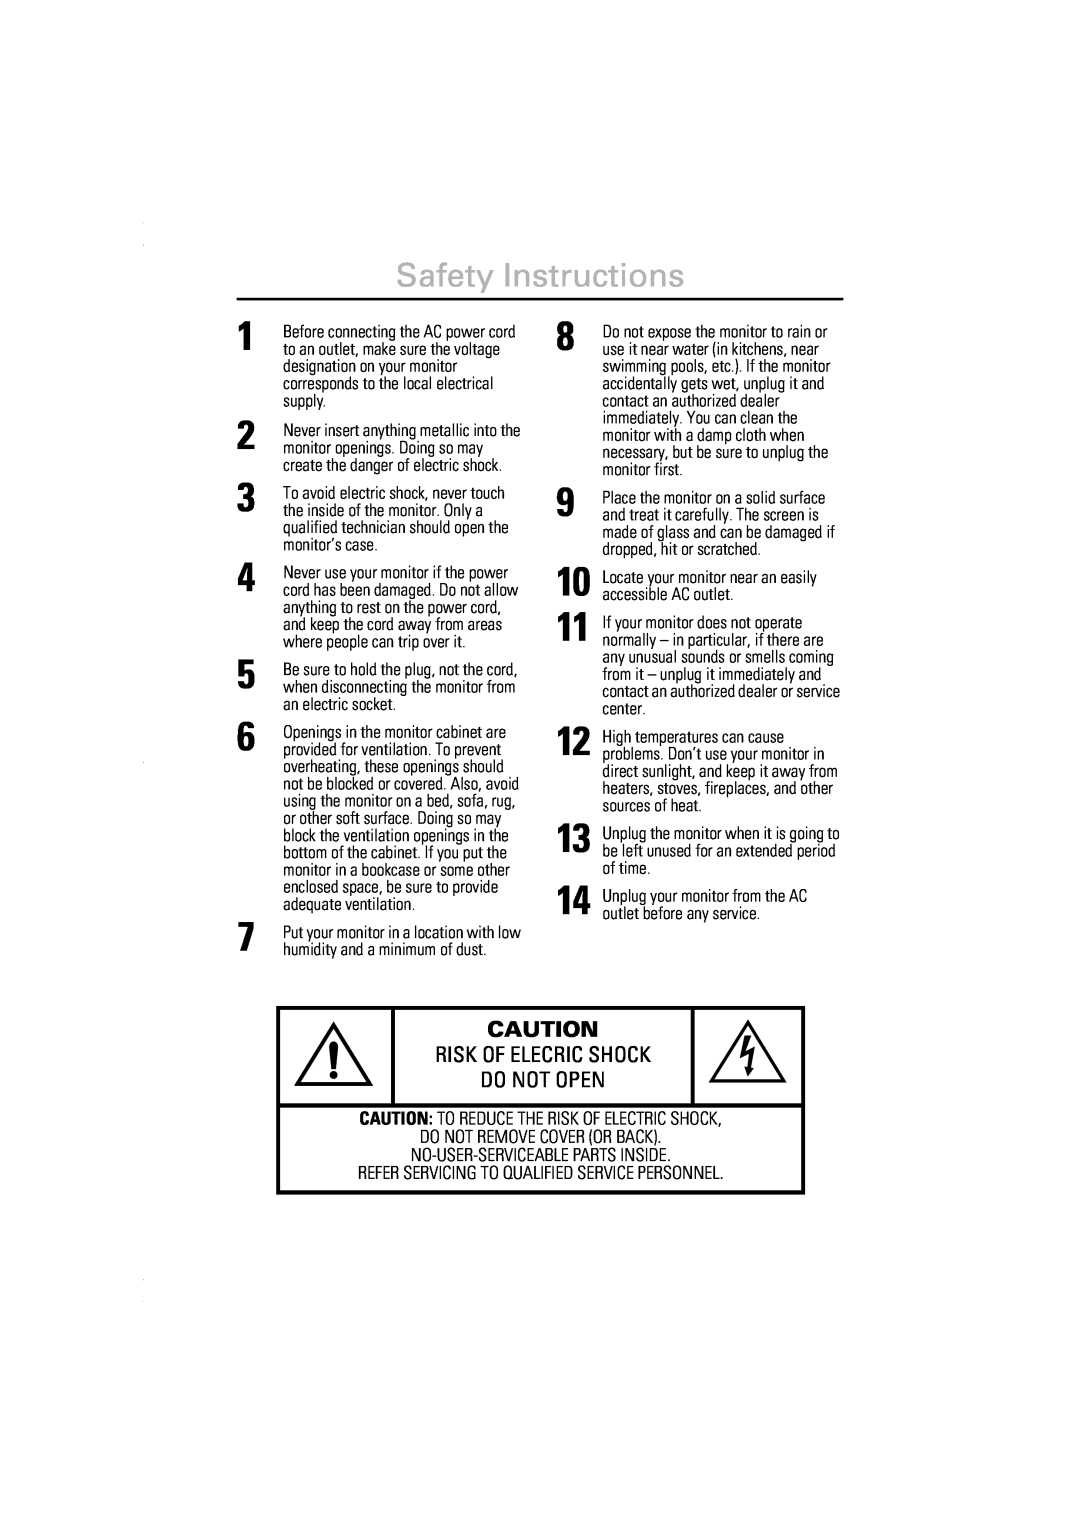 Samsung 550S, 450Nb, 450b, 550s manual Safety Instructions, Risk Of Elecric Shock Do Not Open 